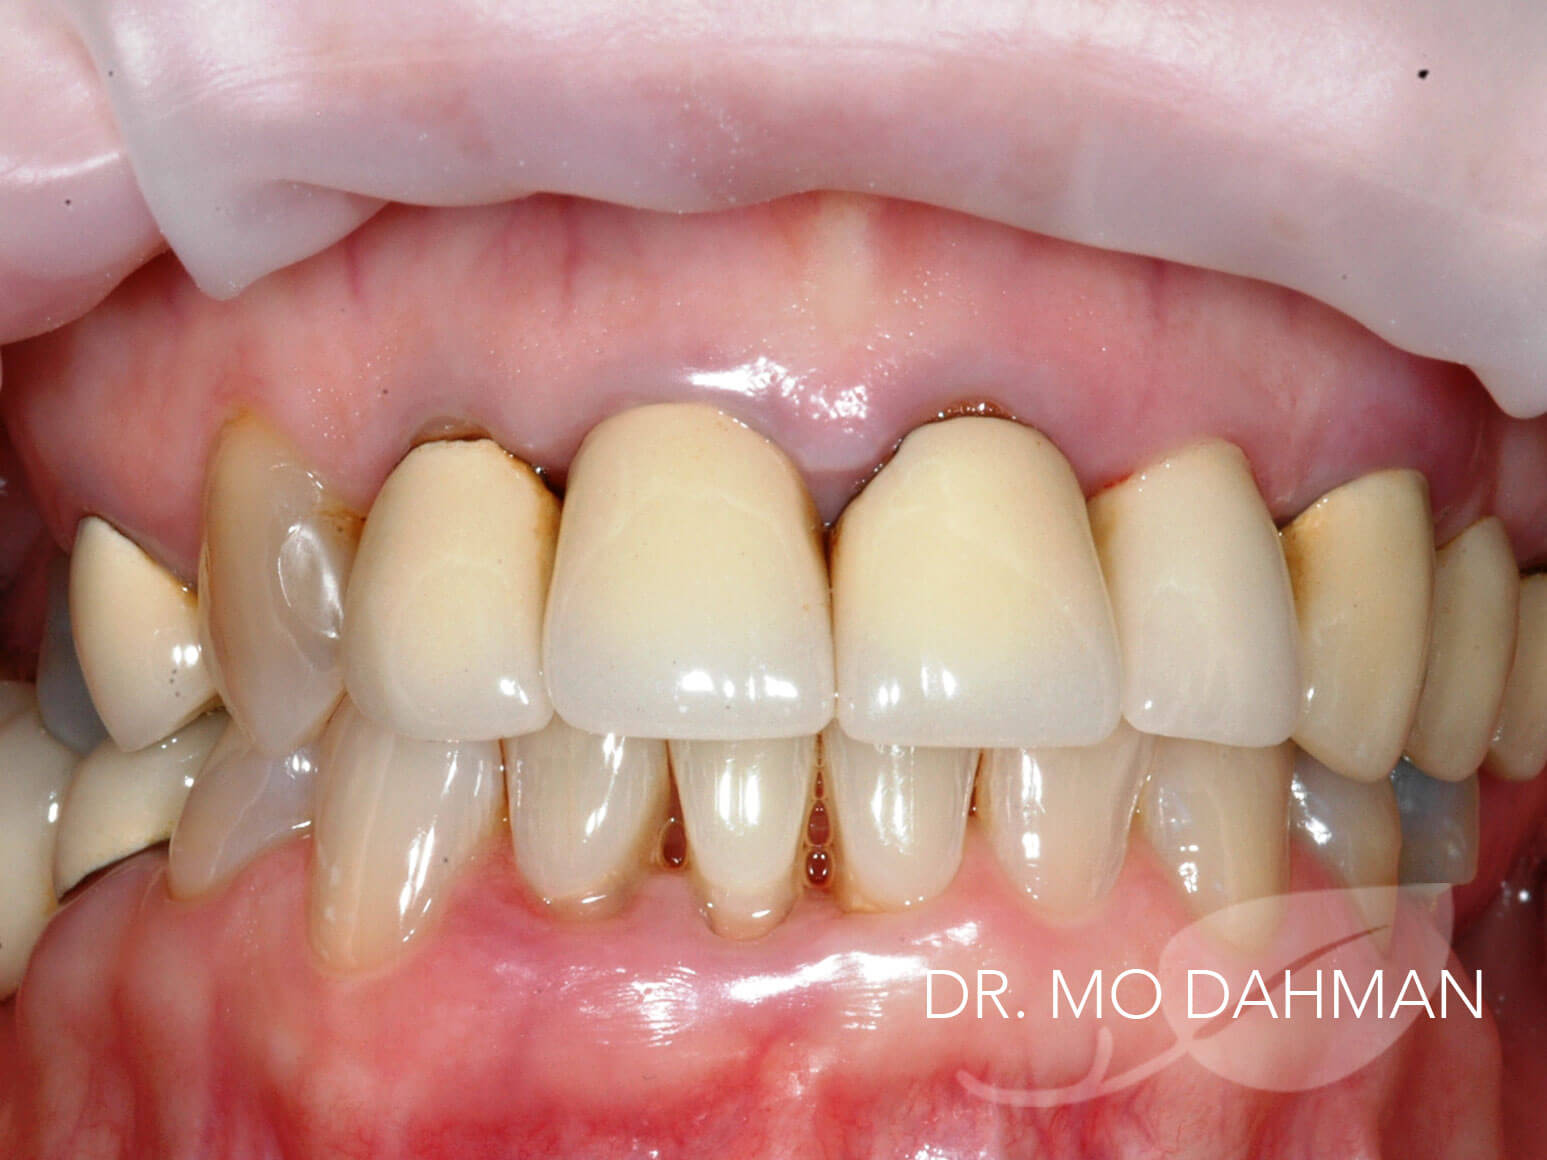 Case 06 retracted smiling before treatment